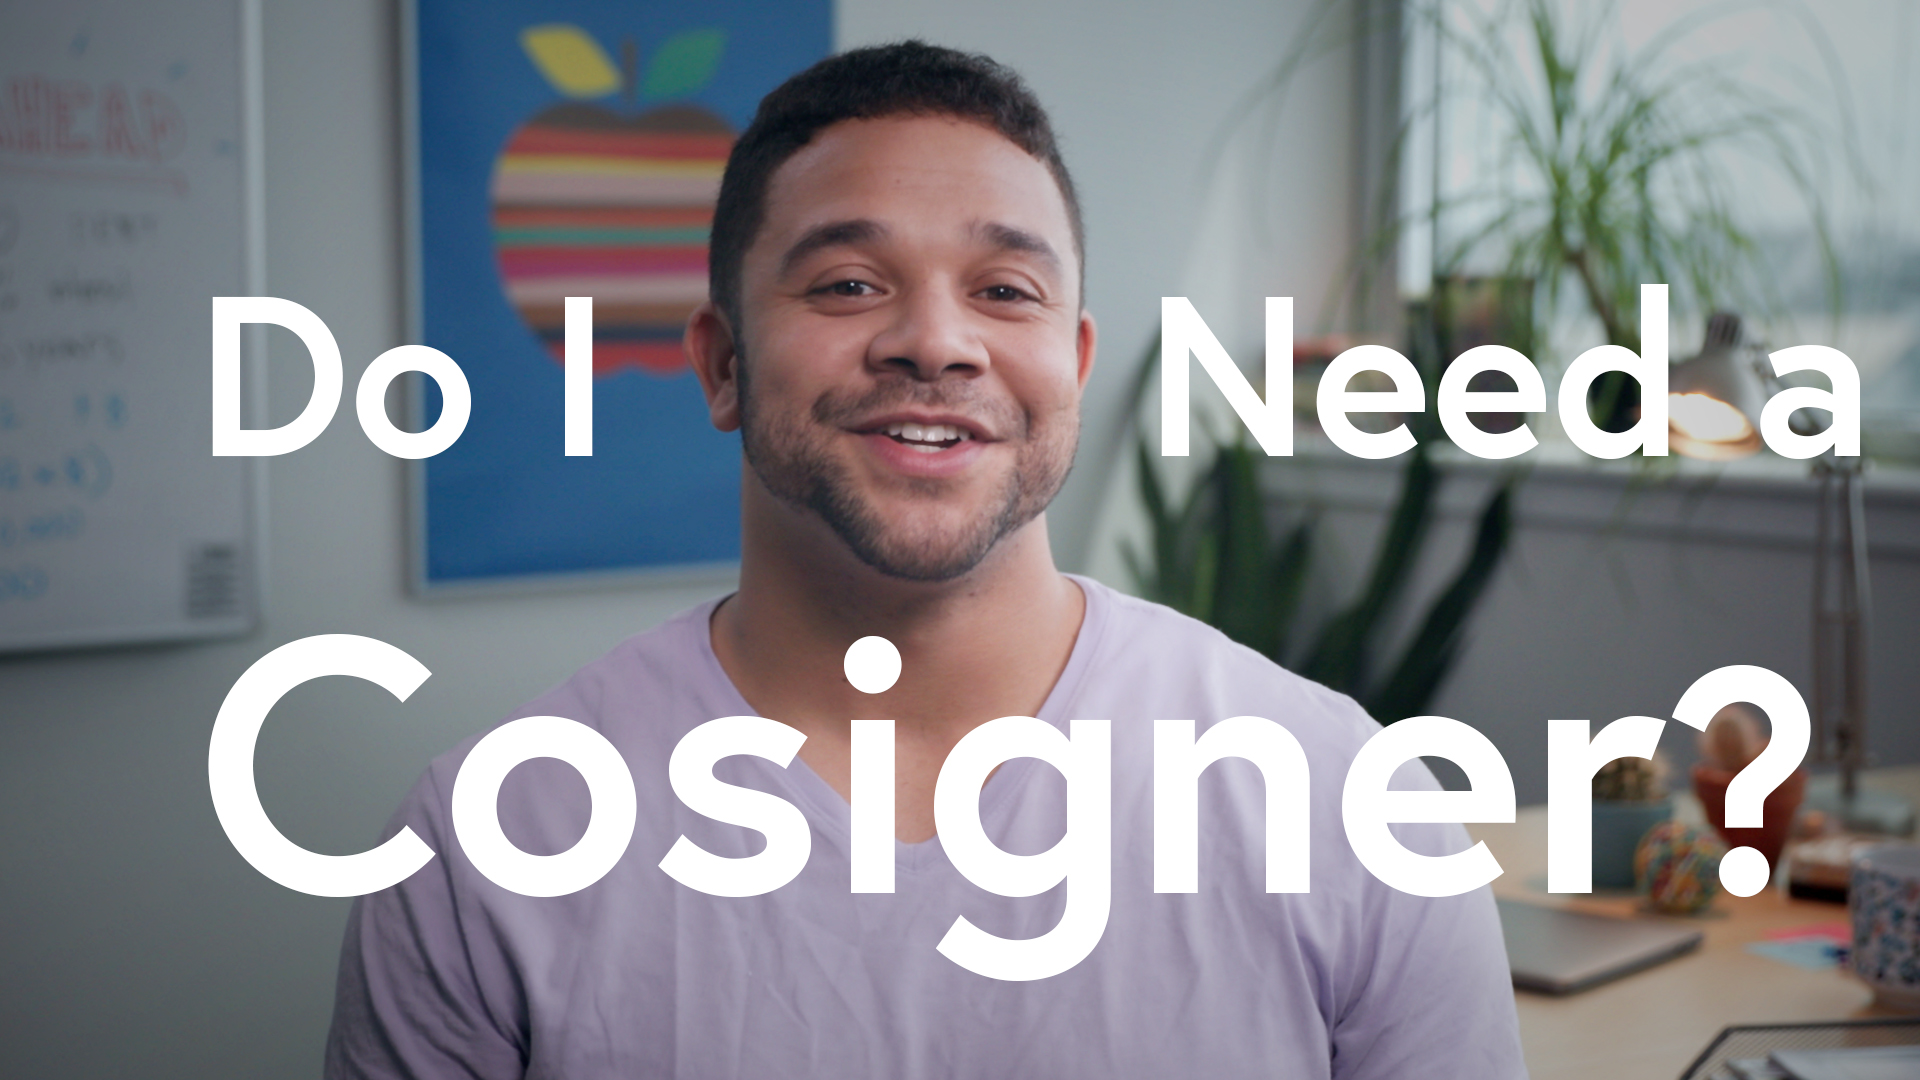 College Ave Student Loans Video Thumbnail: Do I Need a Cosigner? 